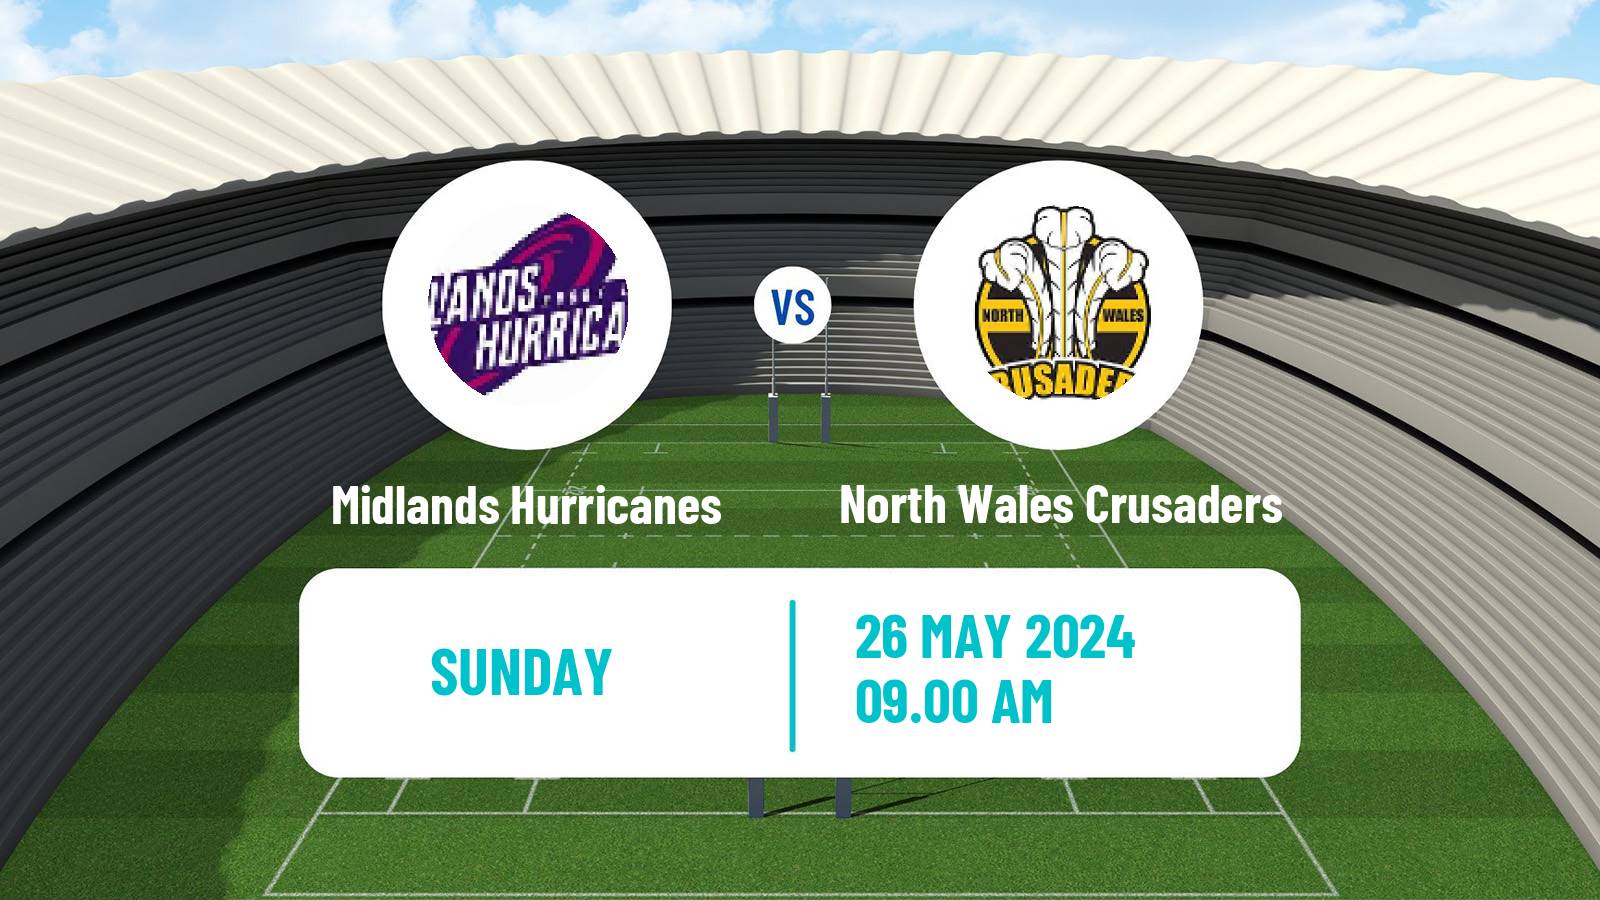 Rugby league English League 1 Rugby League Midlands Hurricanes - North Wales Crusaders